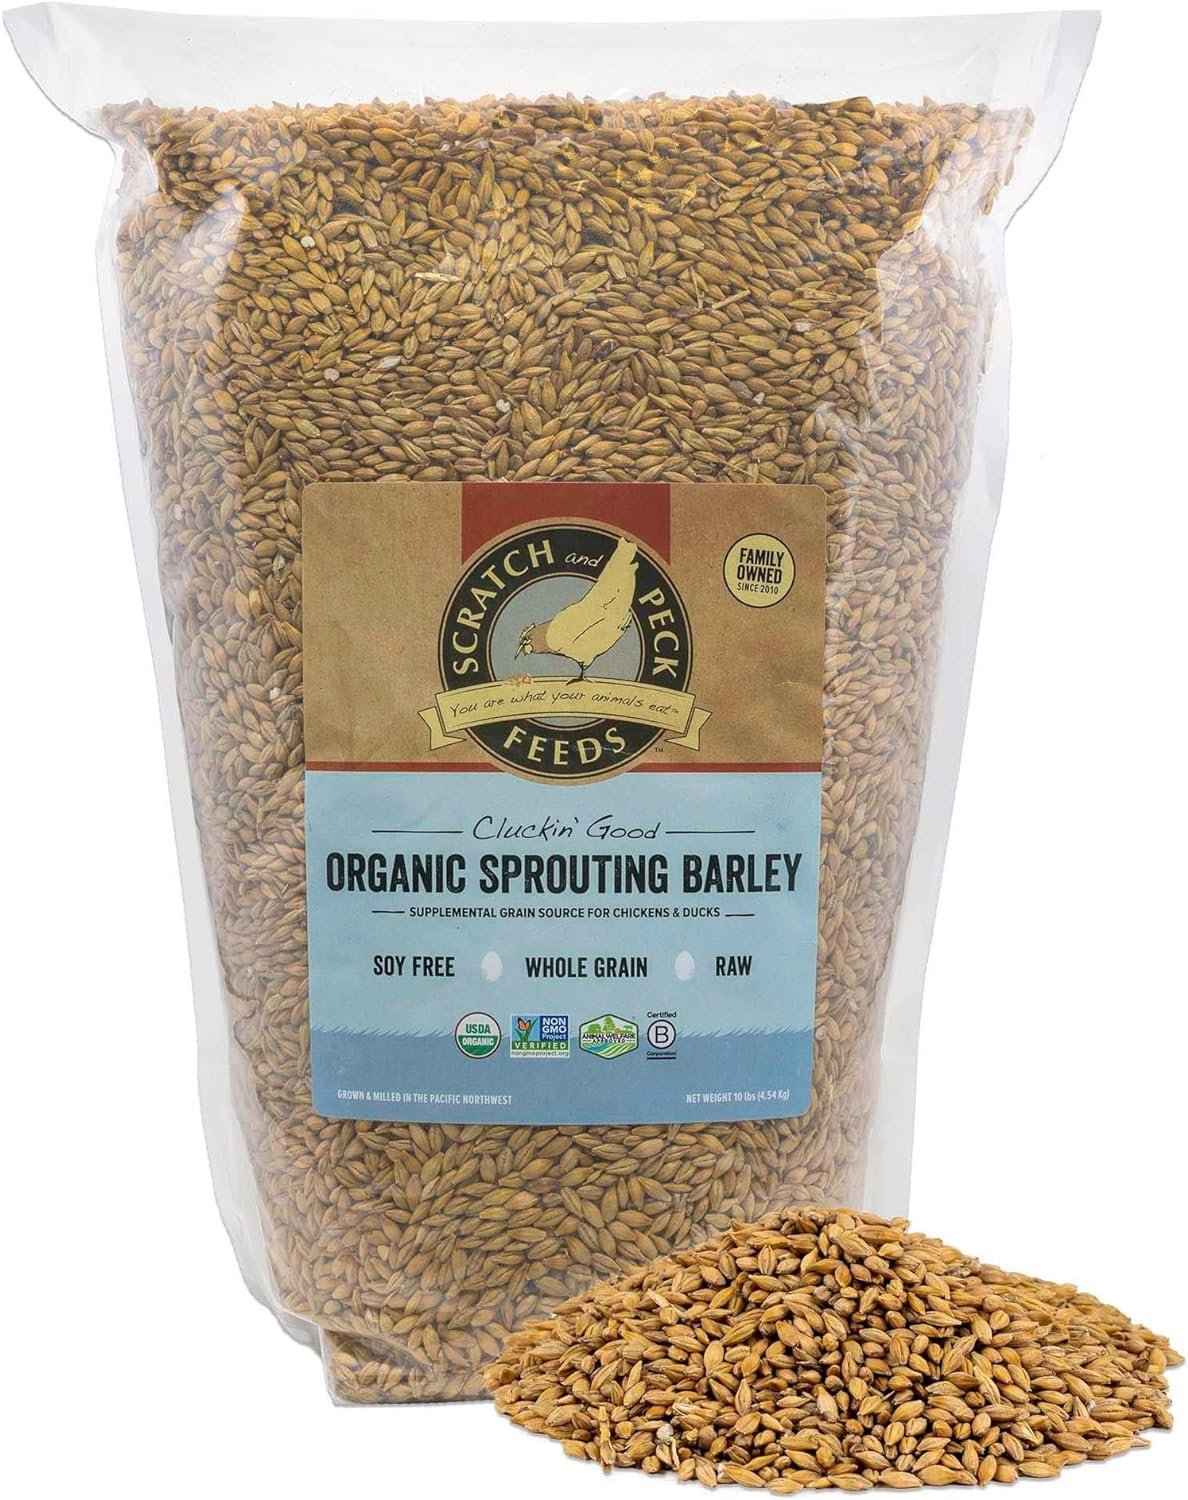 Scratch and Peck Feeds Cluckin Good Organic Sprouting Barley Chicken Treat Supplement - 10-lbs - Soy Free, Whole Grain, Raw - 8300-10